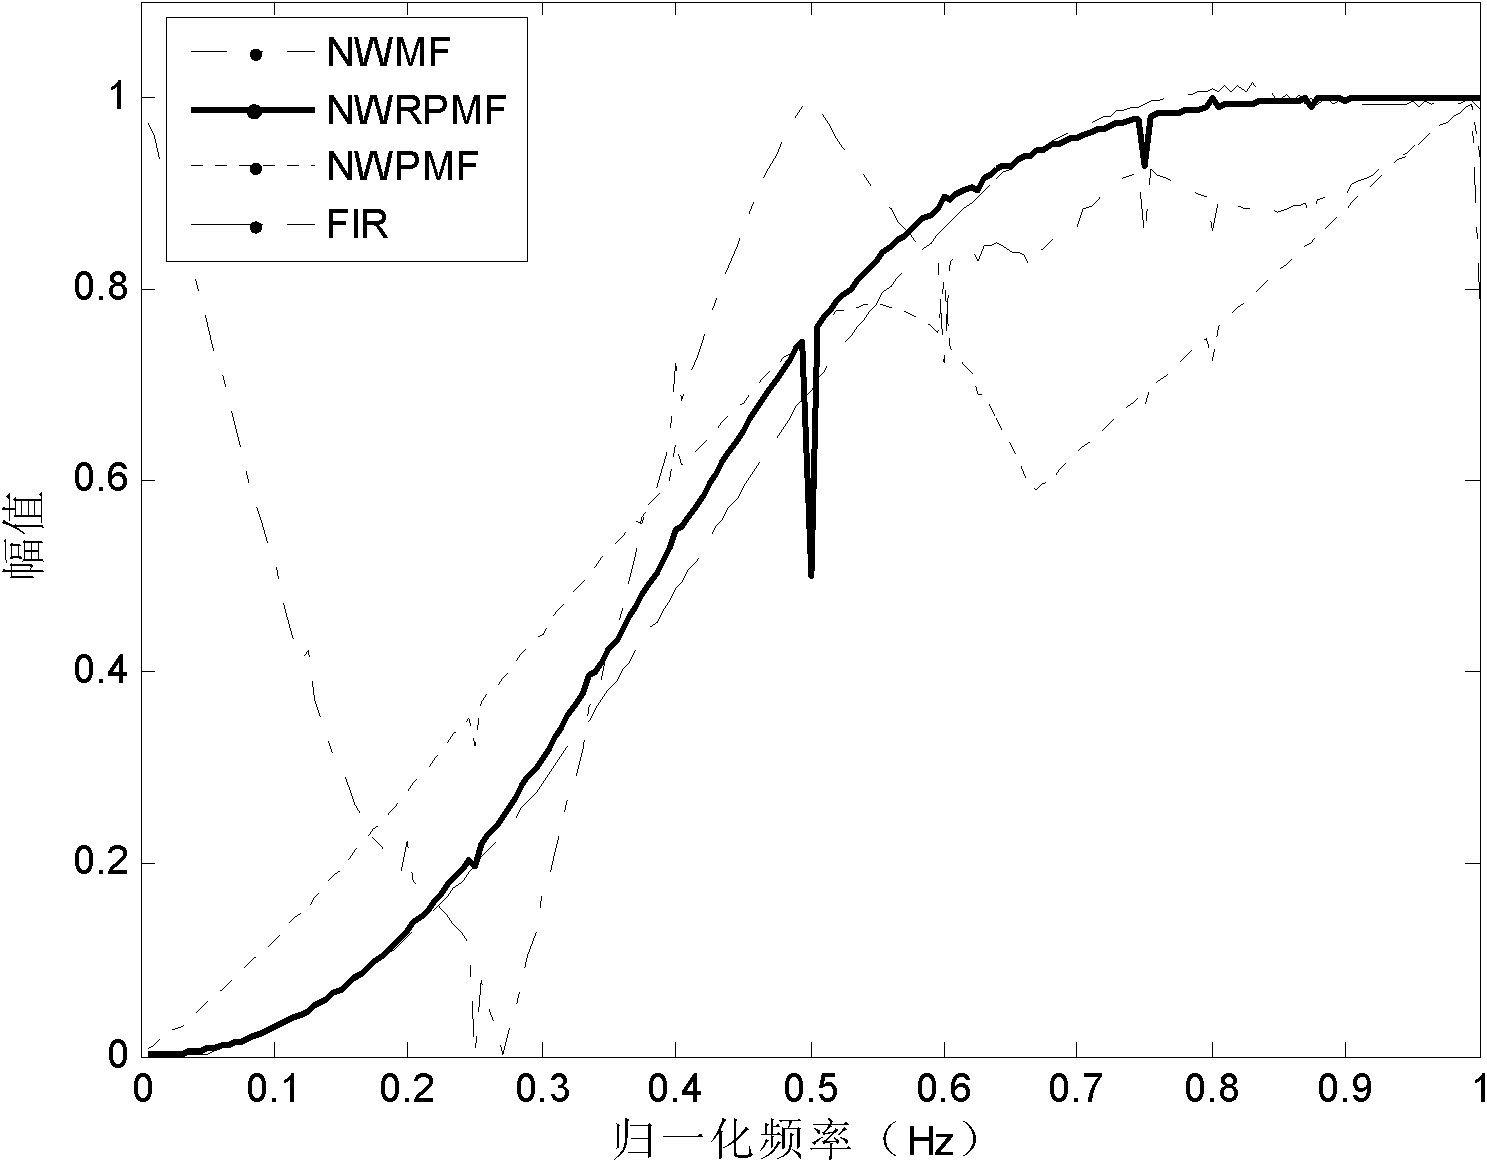 Simplified weighted repeat pseudo-median filtering method with negative coefficients